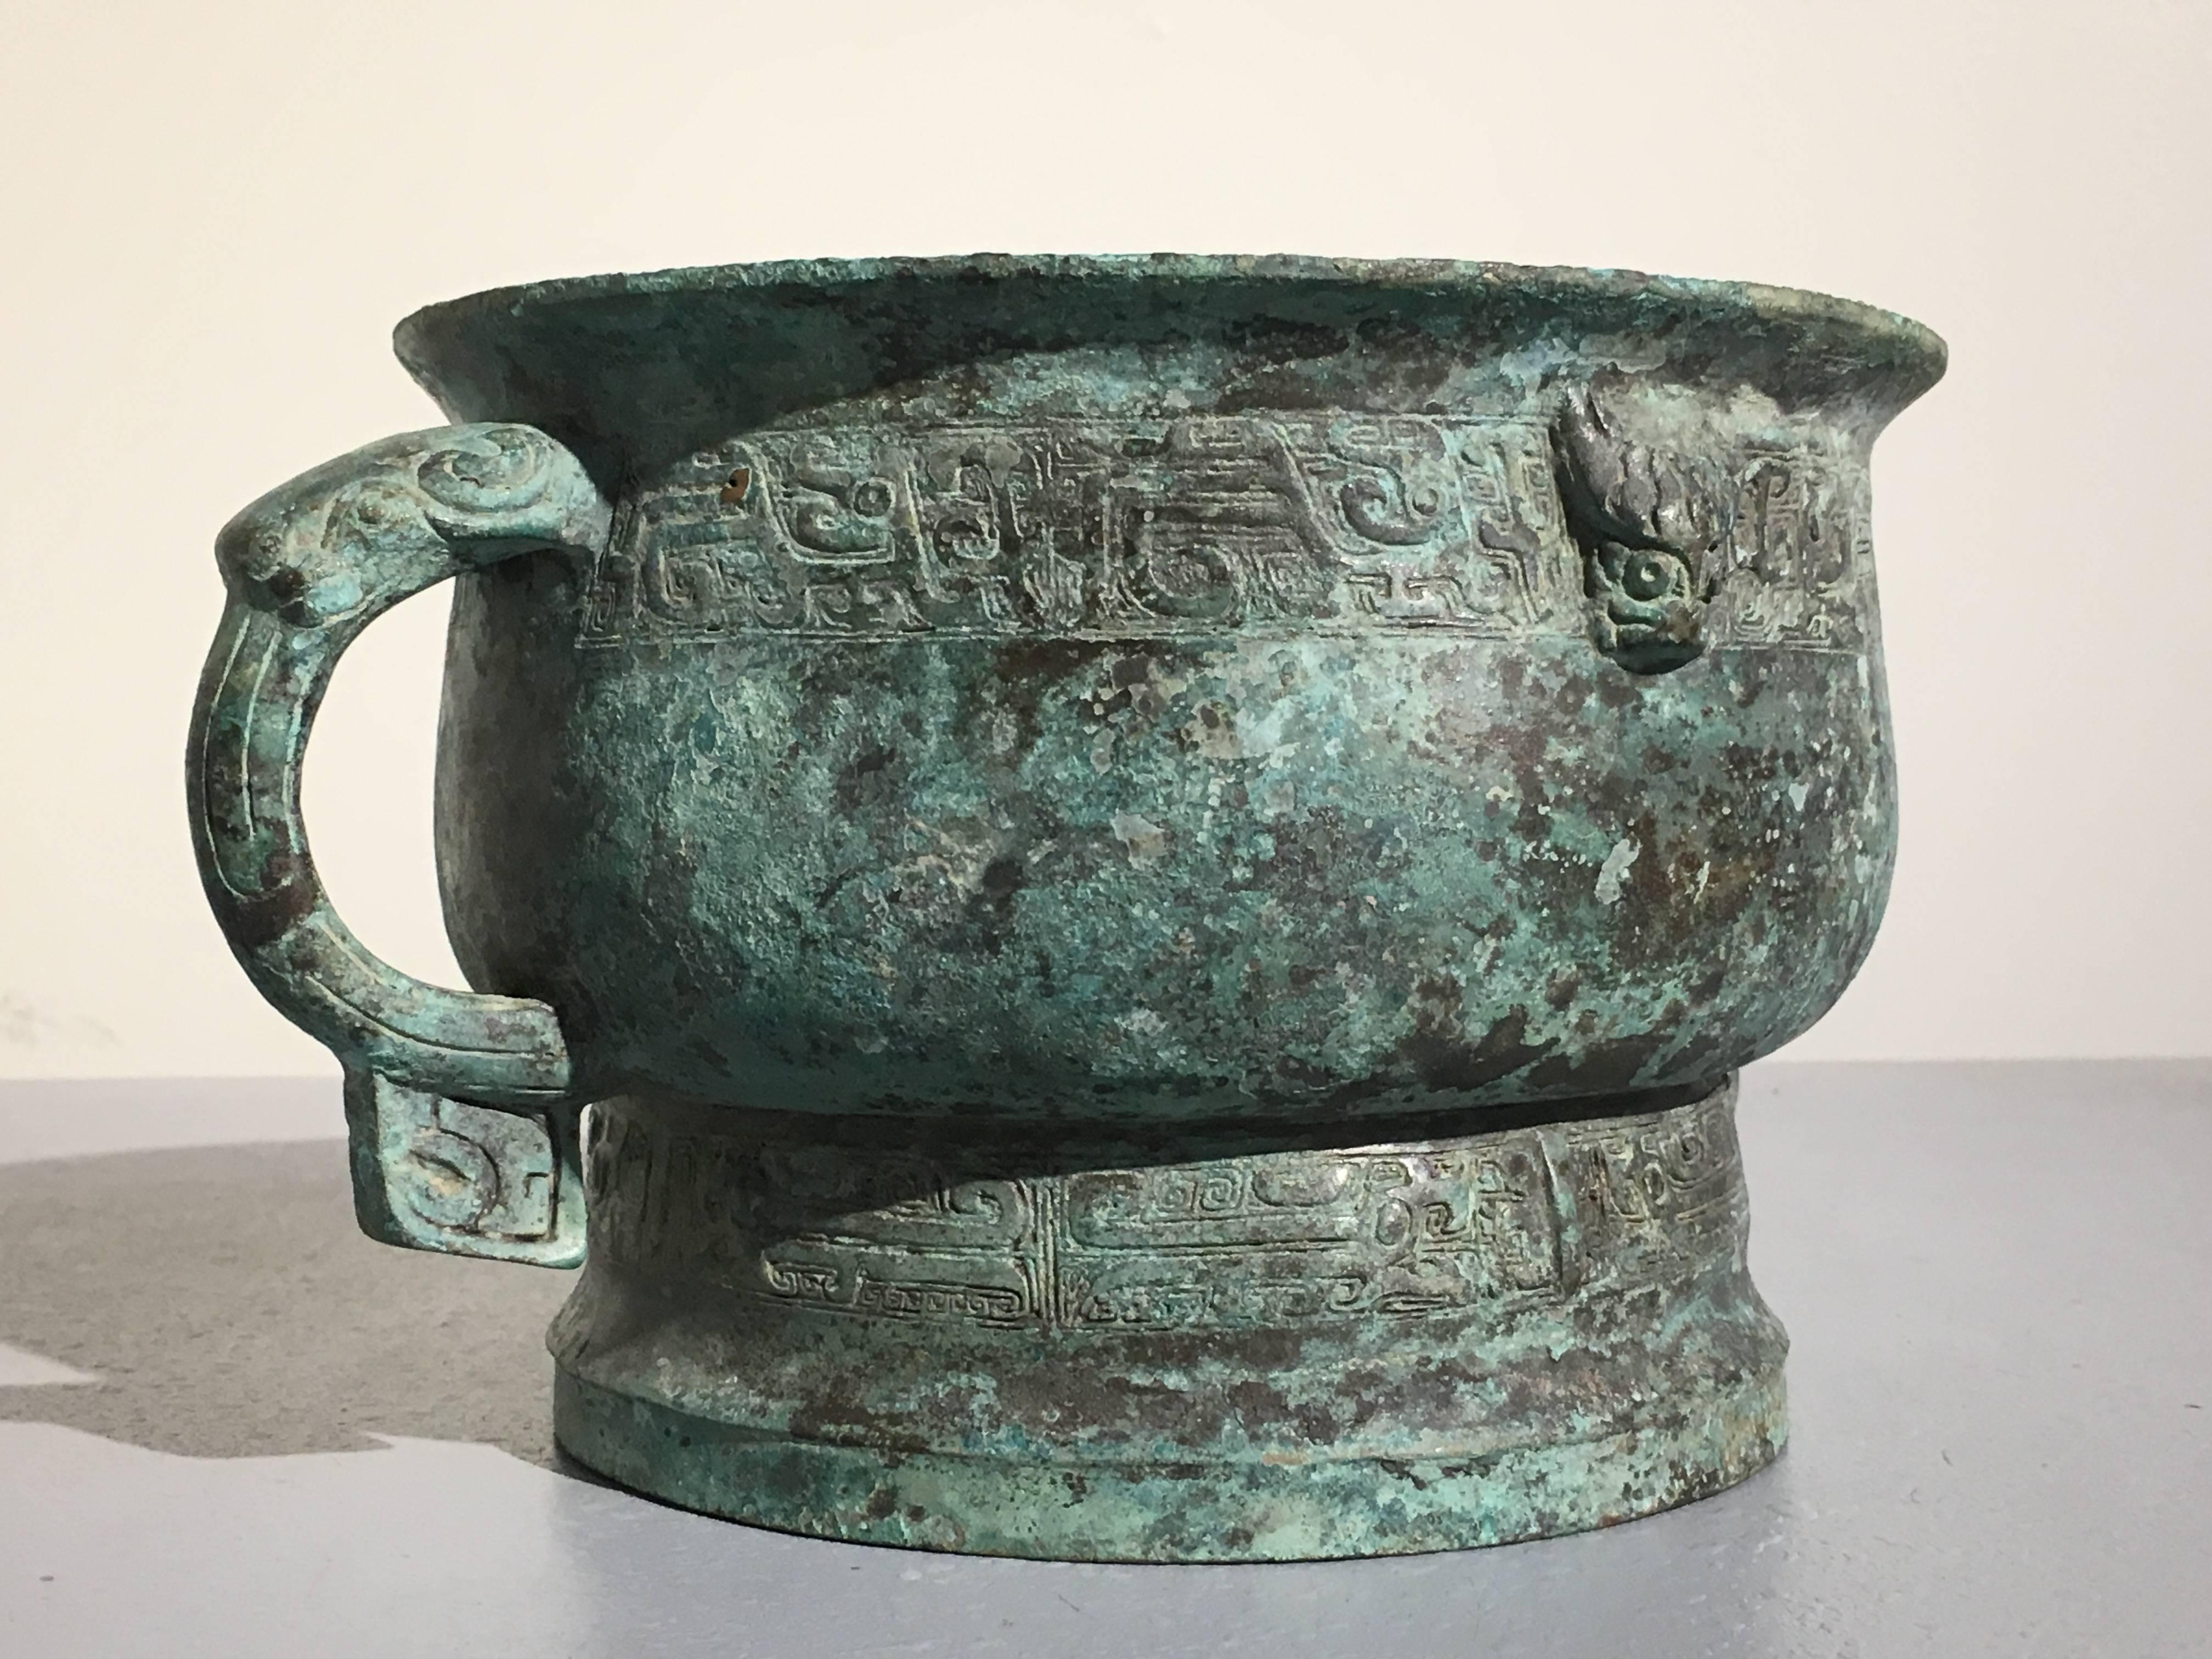 Archaistic Archaic Chinese Bronze Ritual Vessel, Gui, Early Western Zhou, 11th century BCE For Sale